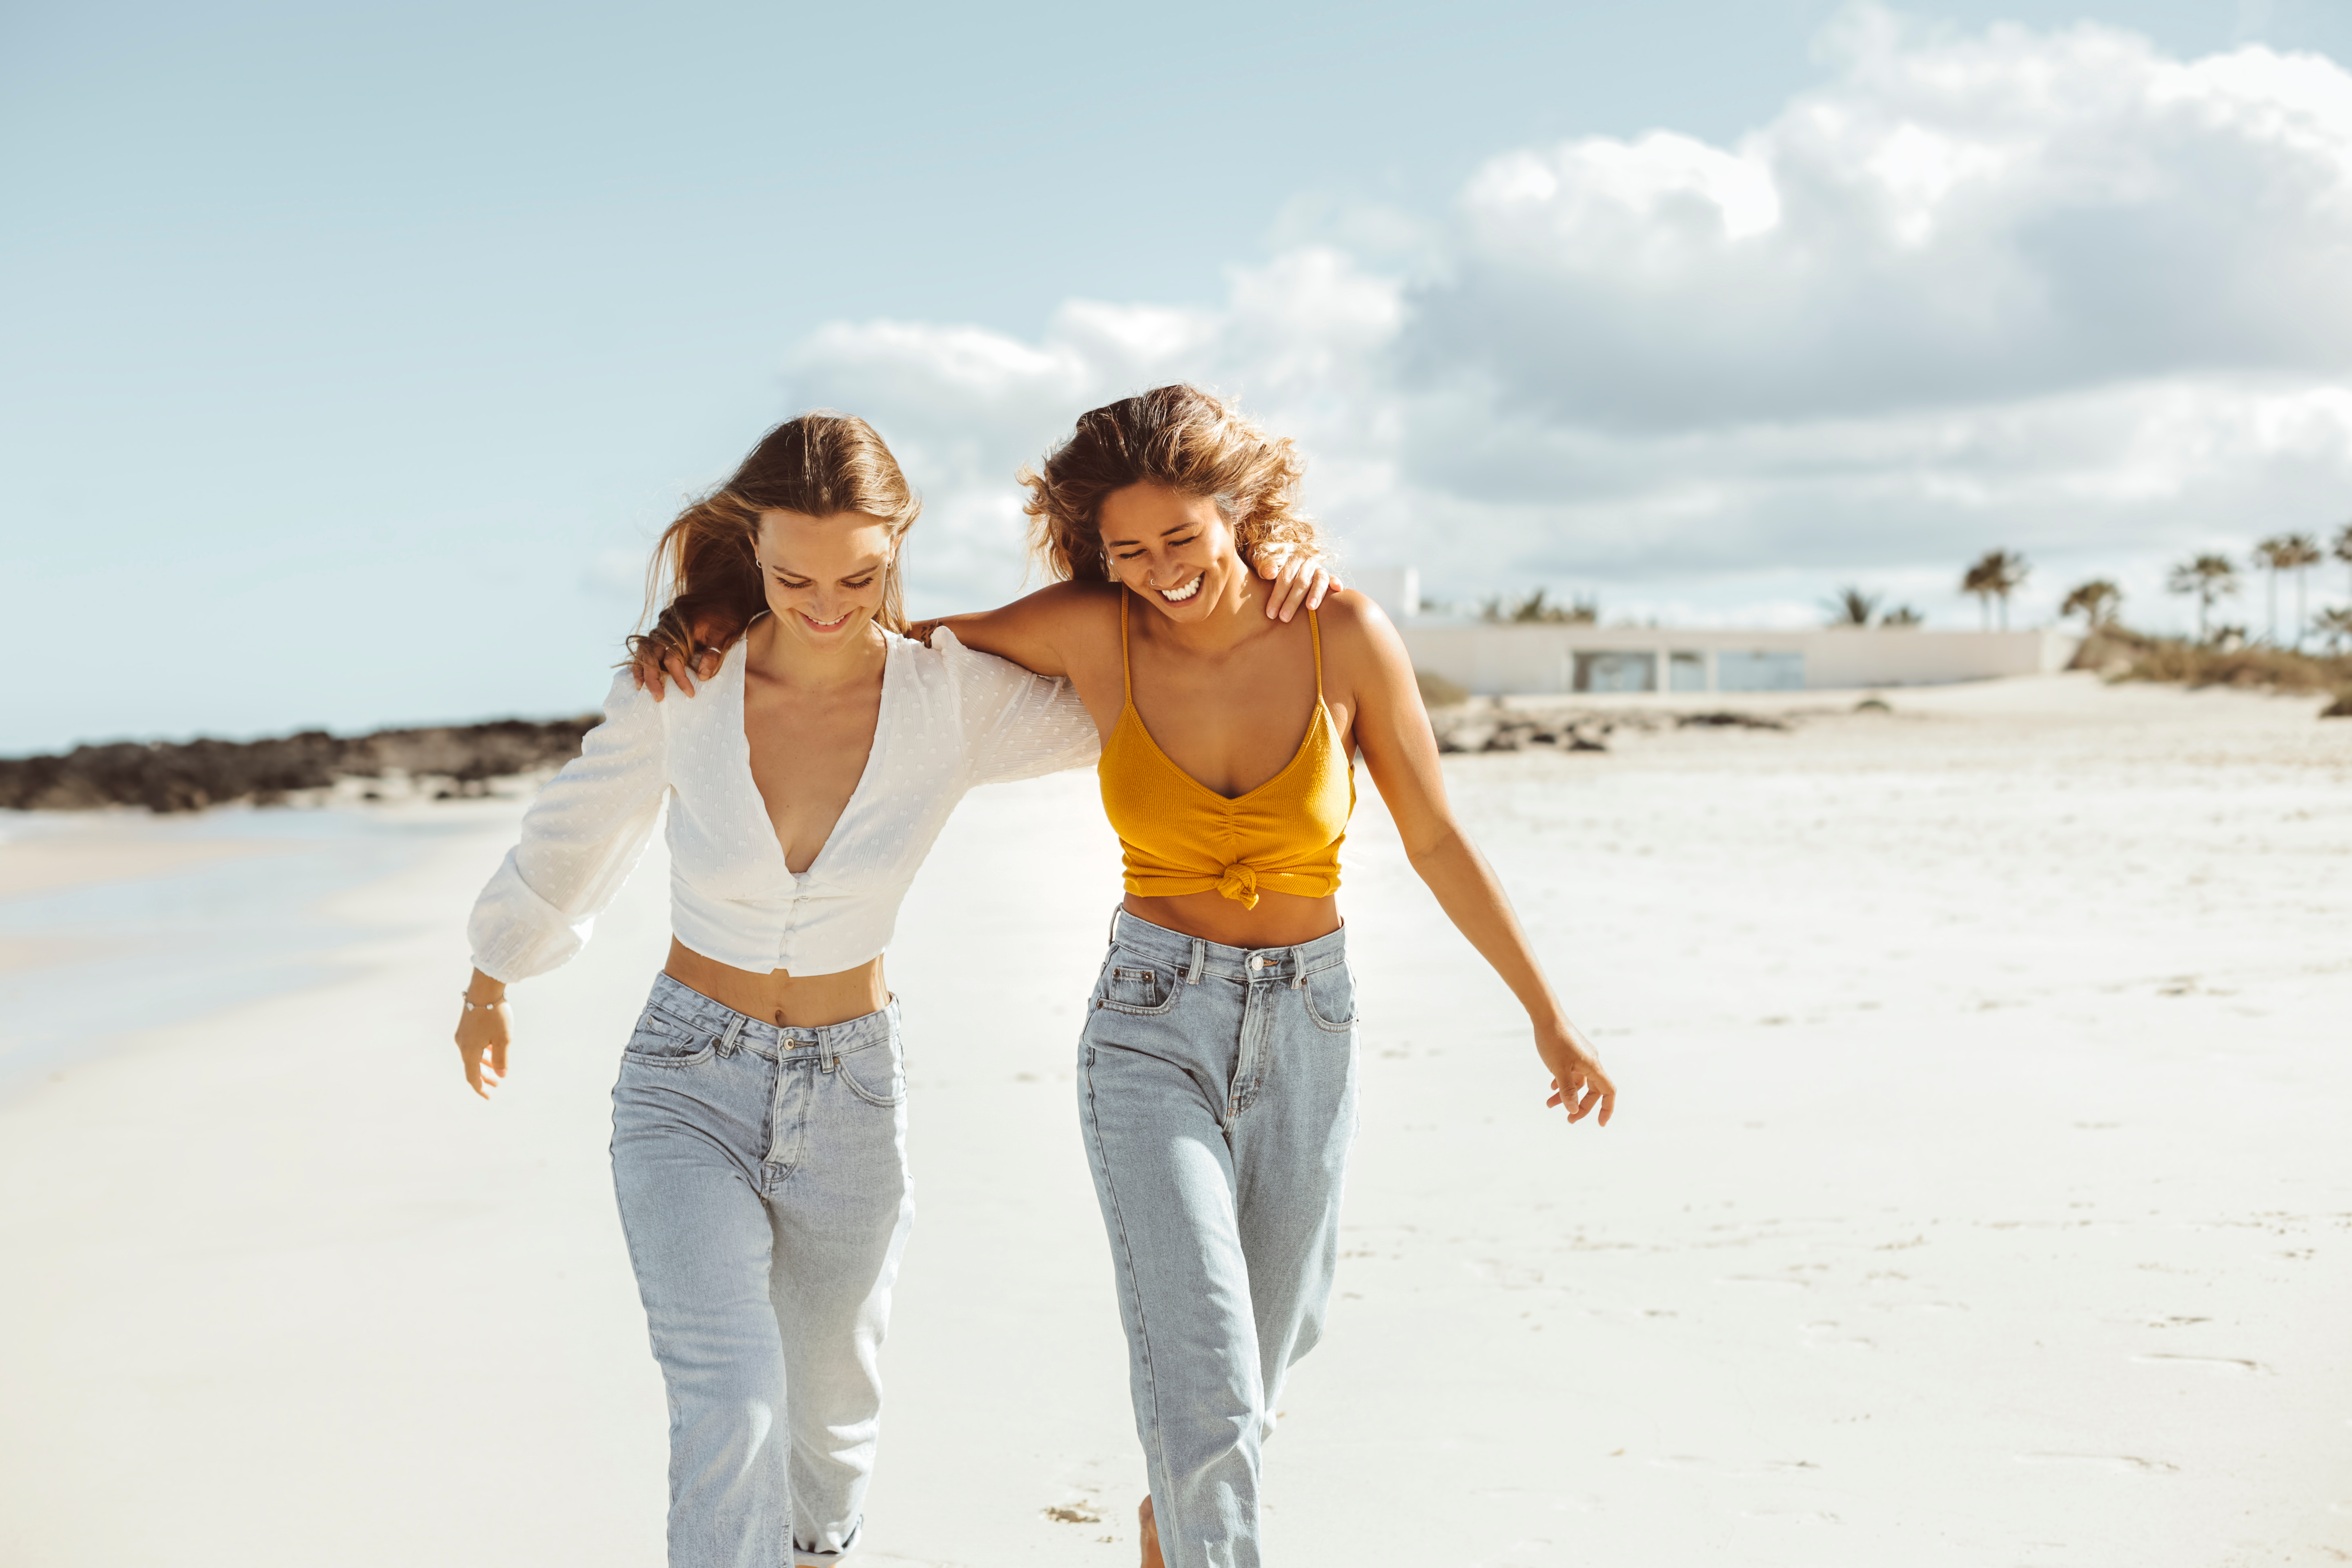 Two best friends walking along a beach and laughing | Source: Shutterstock